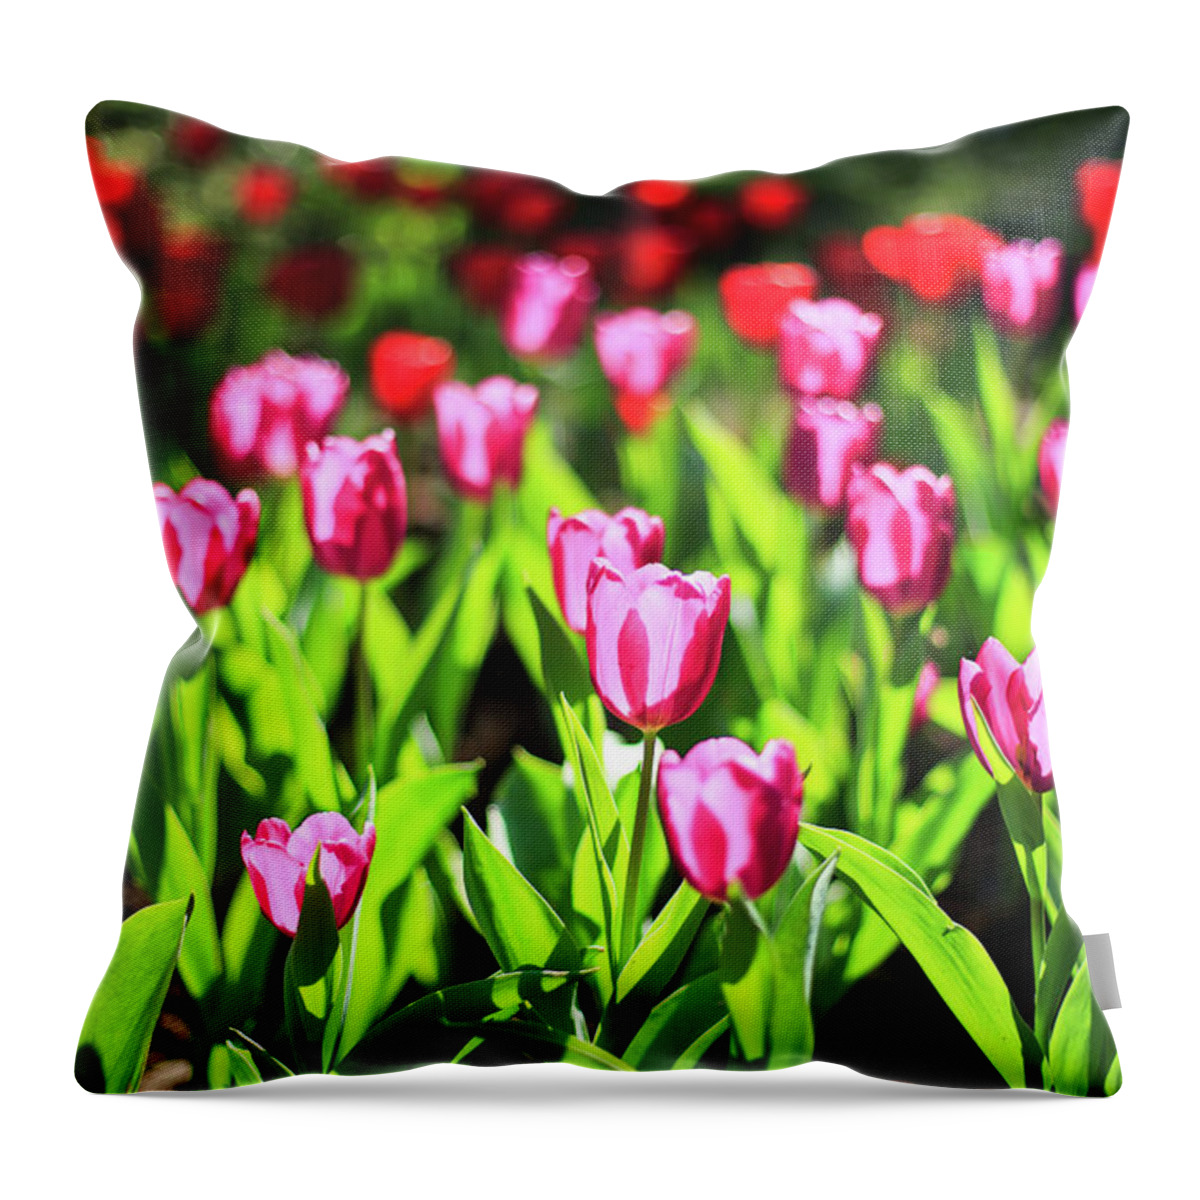 Taiwan Throw Pillow featuring the photograph Purple And Red Tulips Under Sun Light by Samyaoo